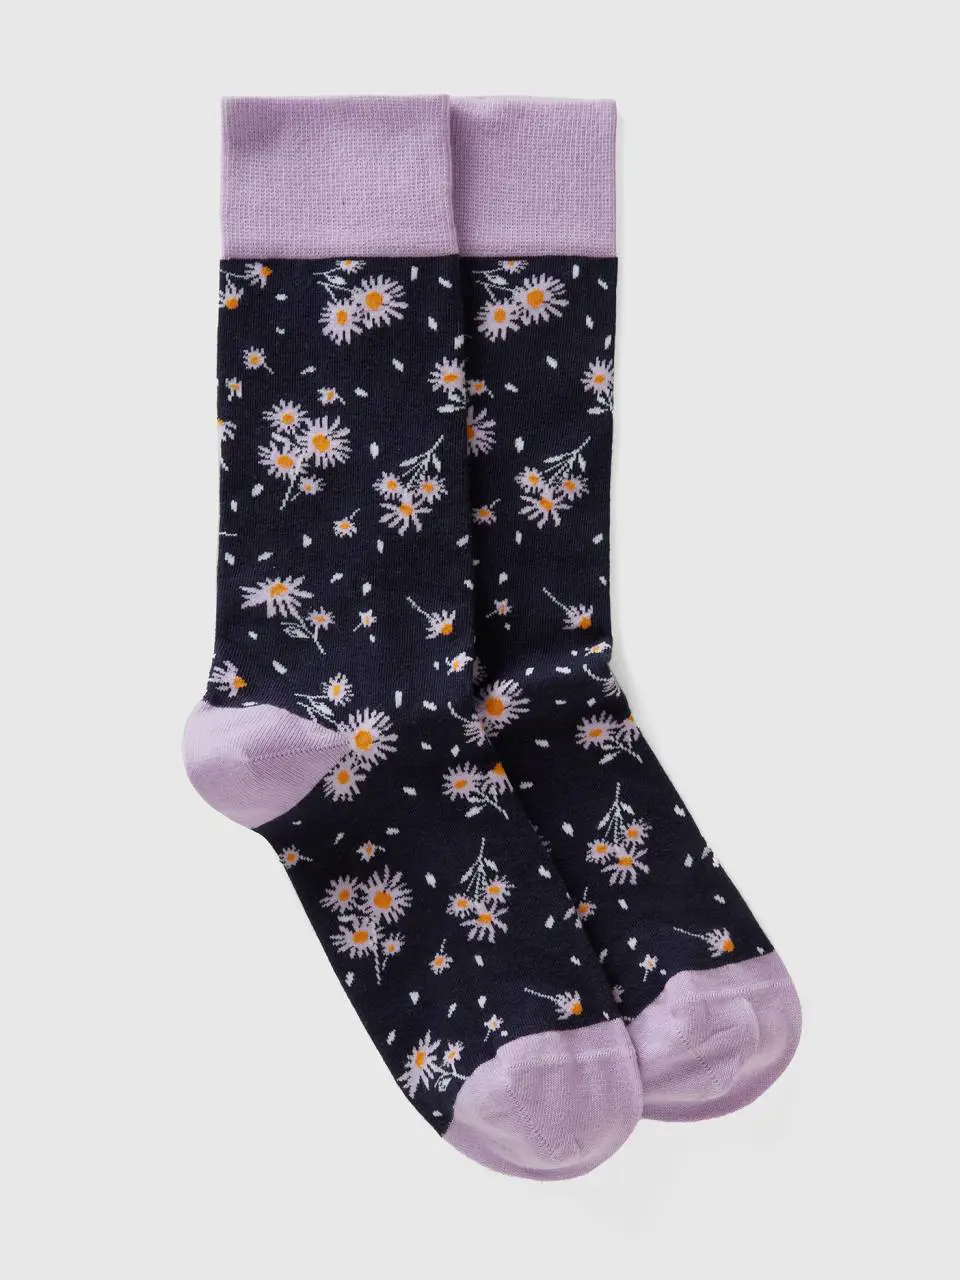 Benetton long lilac and blue floral socks. 1